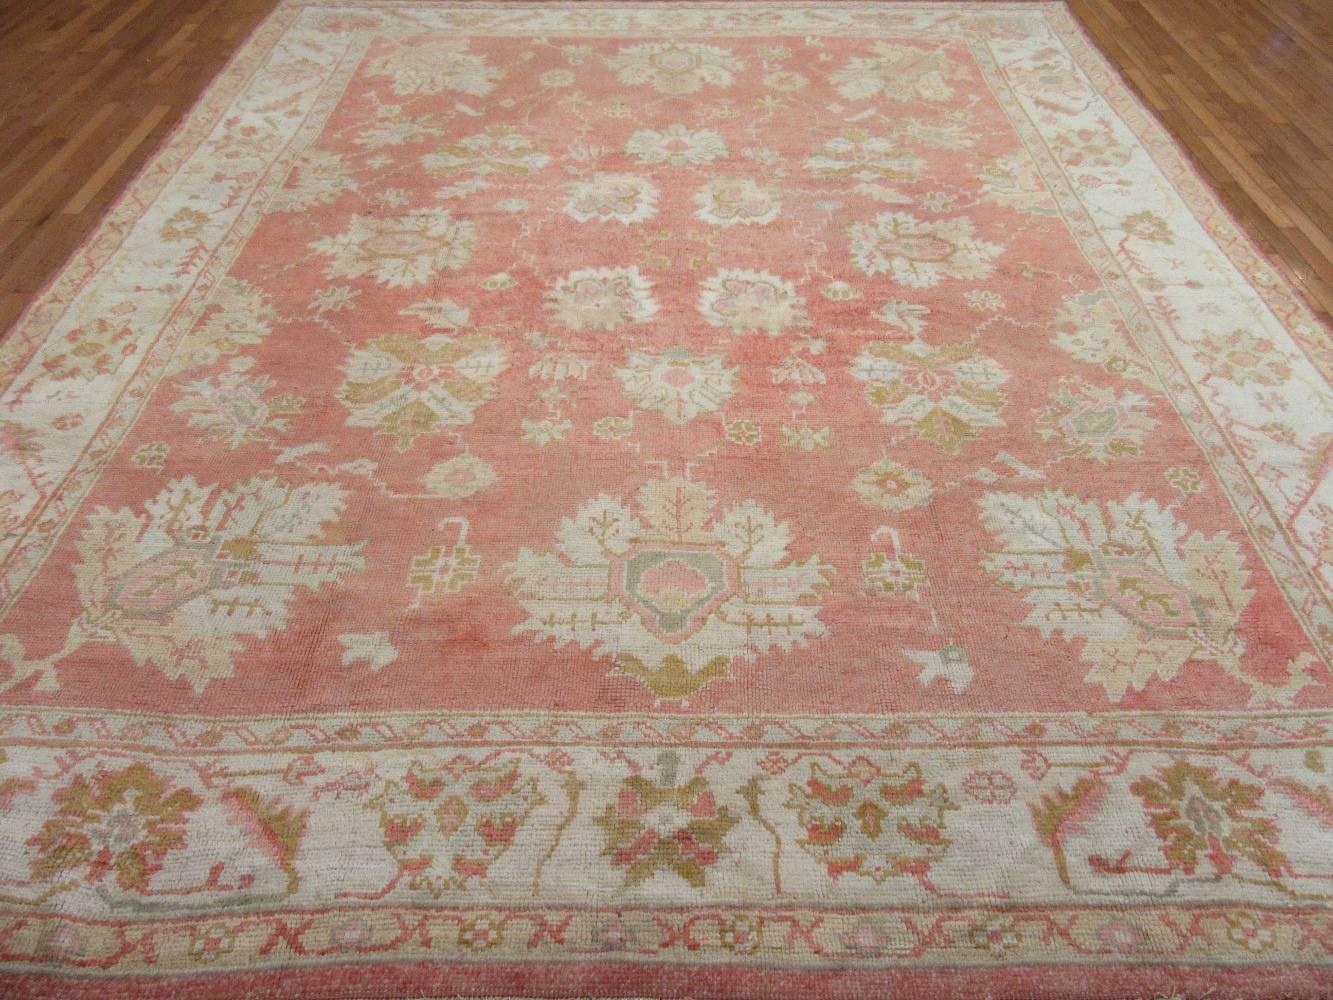 Turkish Oushak rugs are known for their larger scale simpler designs. This is an antique hand knotted Turkish Oushak with a simple all over pattern on a coral red field and ivory border. It is made with all fine wool colored with natural dyes. It